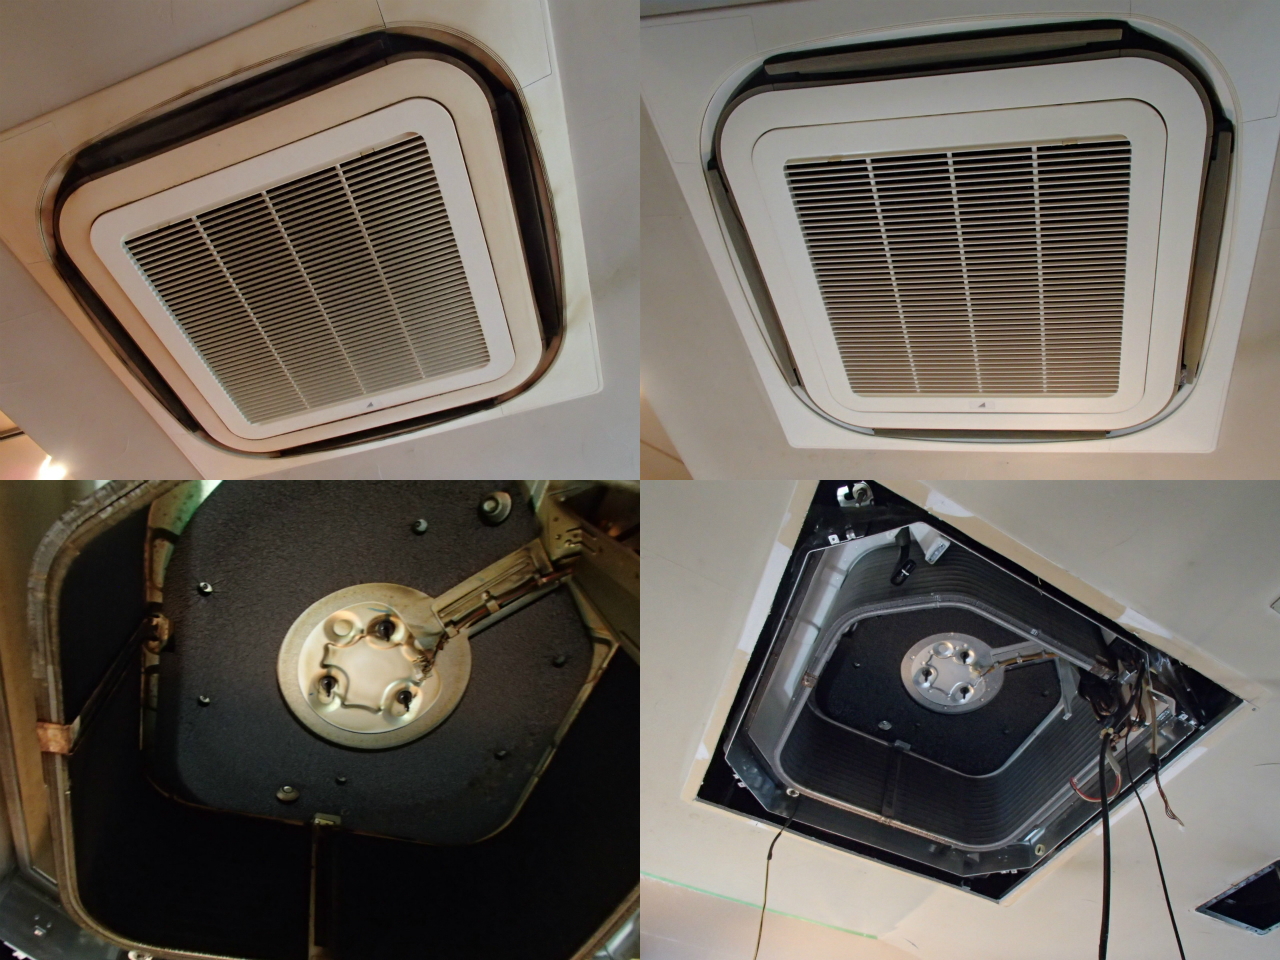 http://ajras.net/images/130109-aircon1.jpg